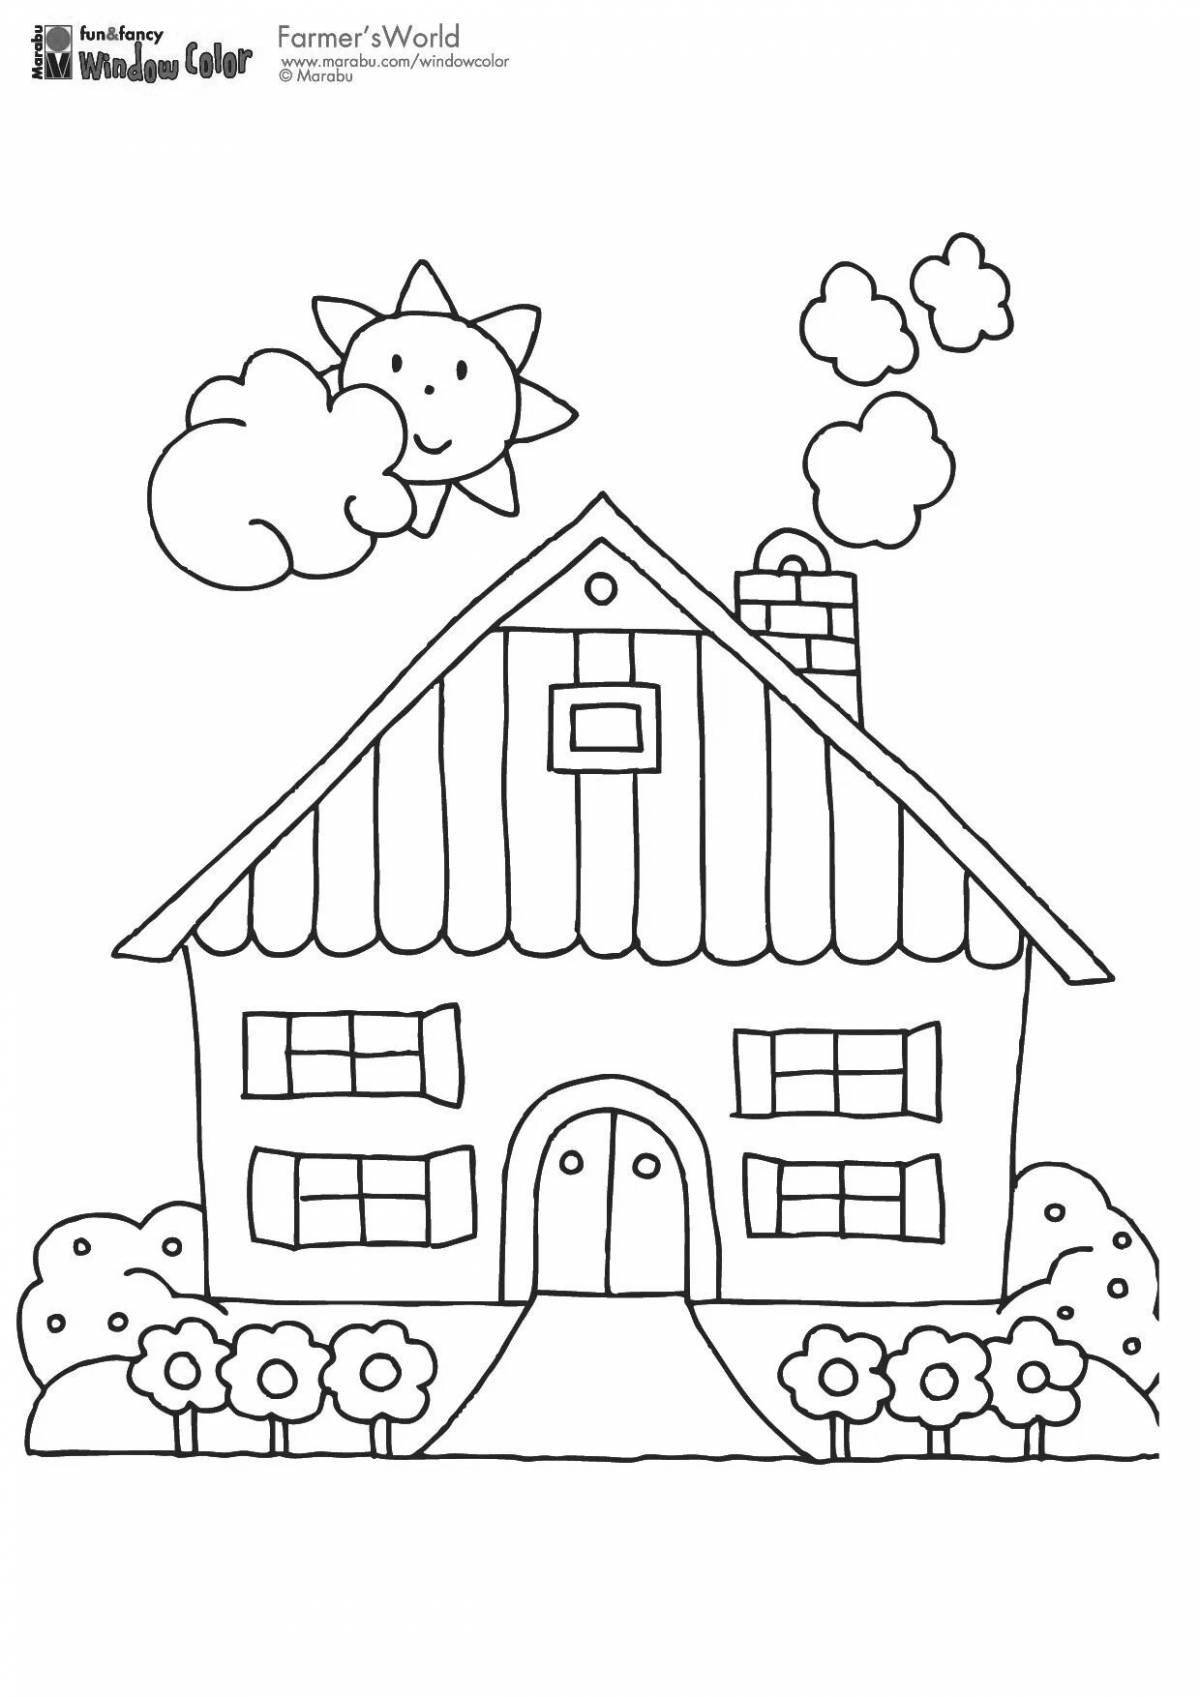 Shining houses coloring book for 4-5 year olds